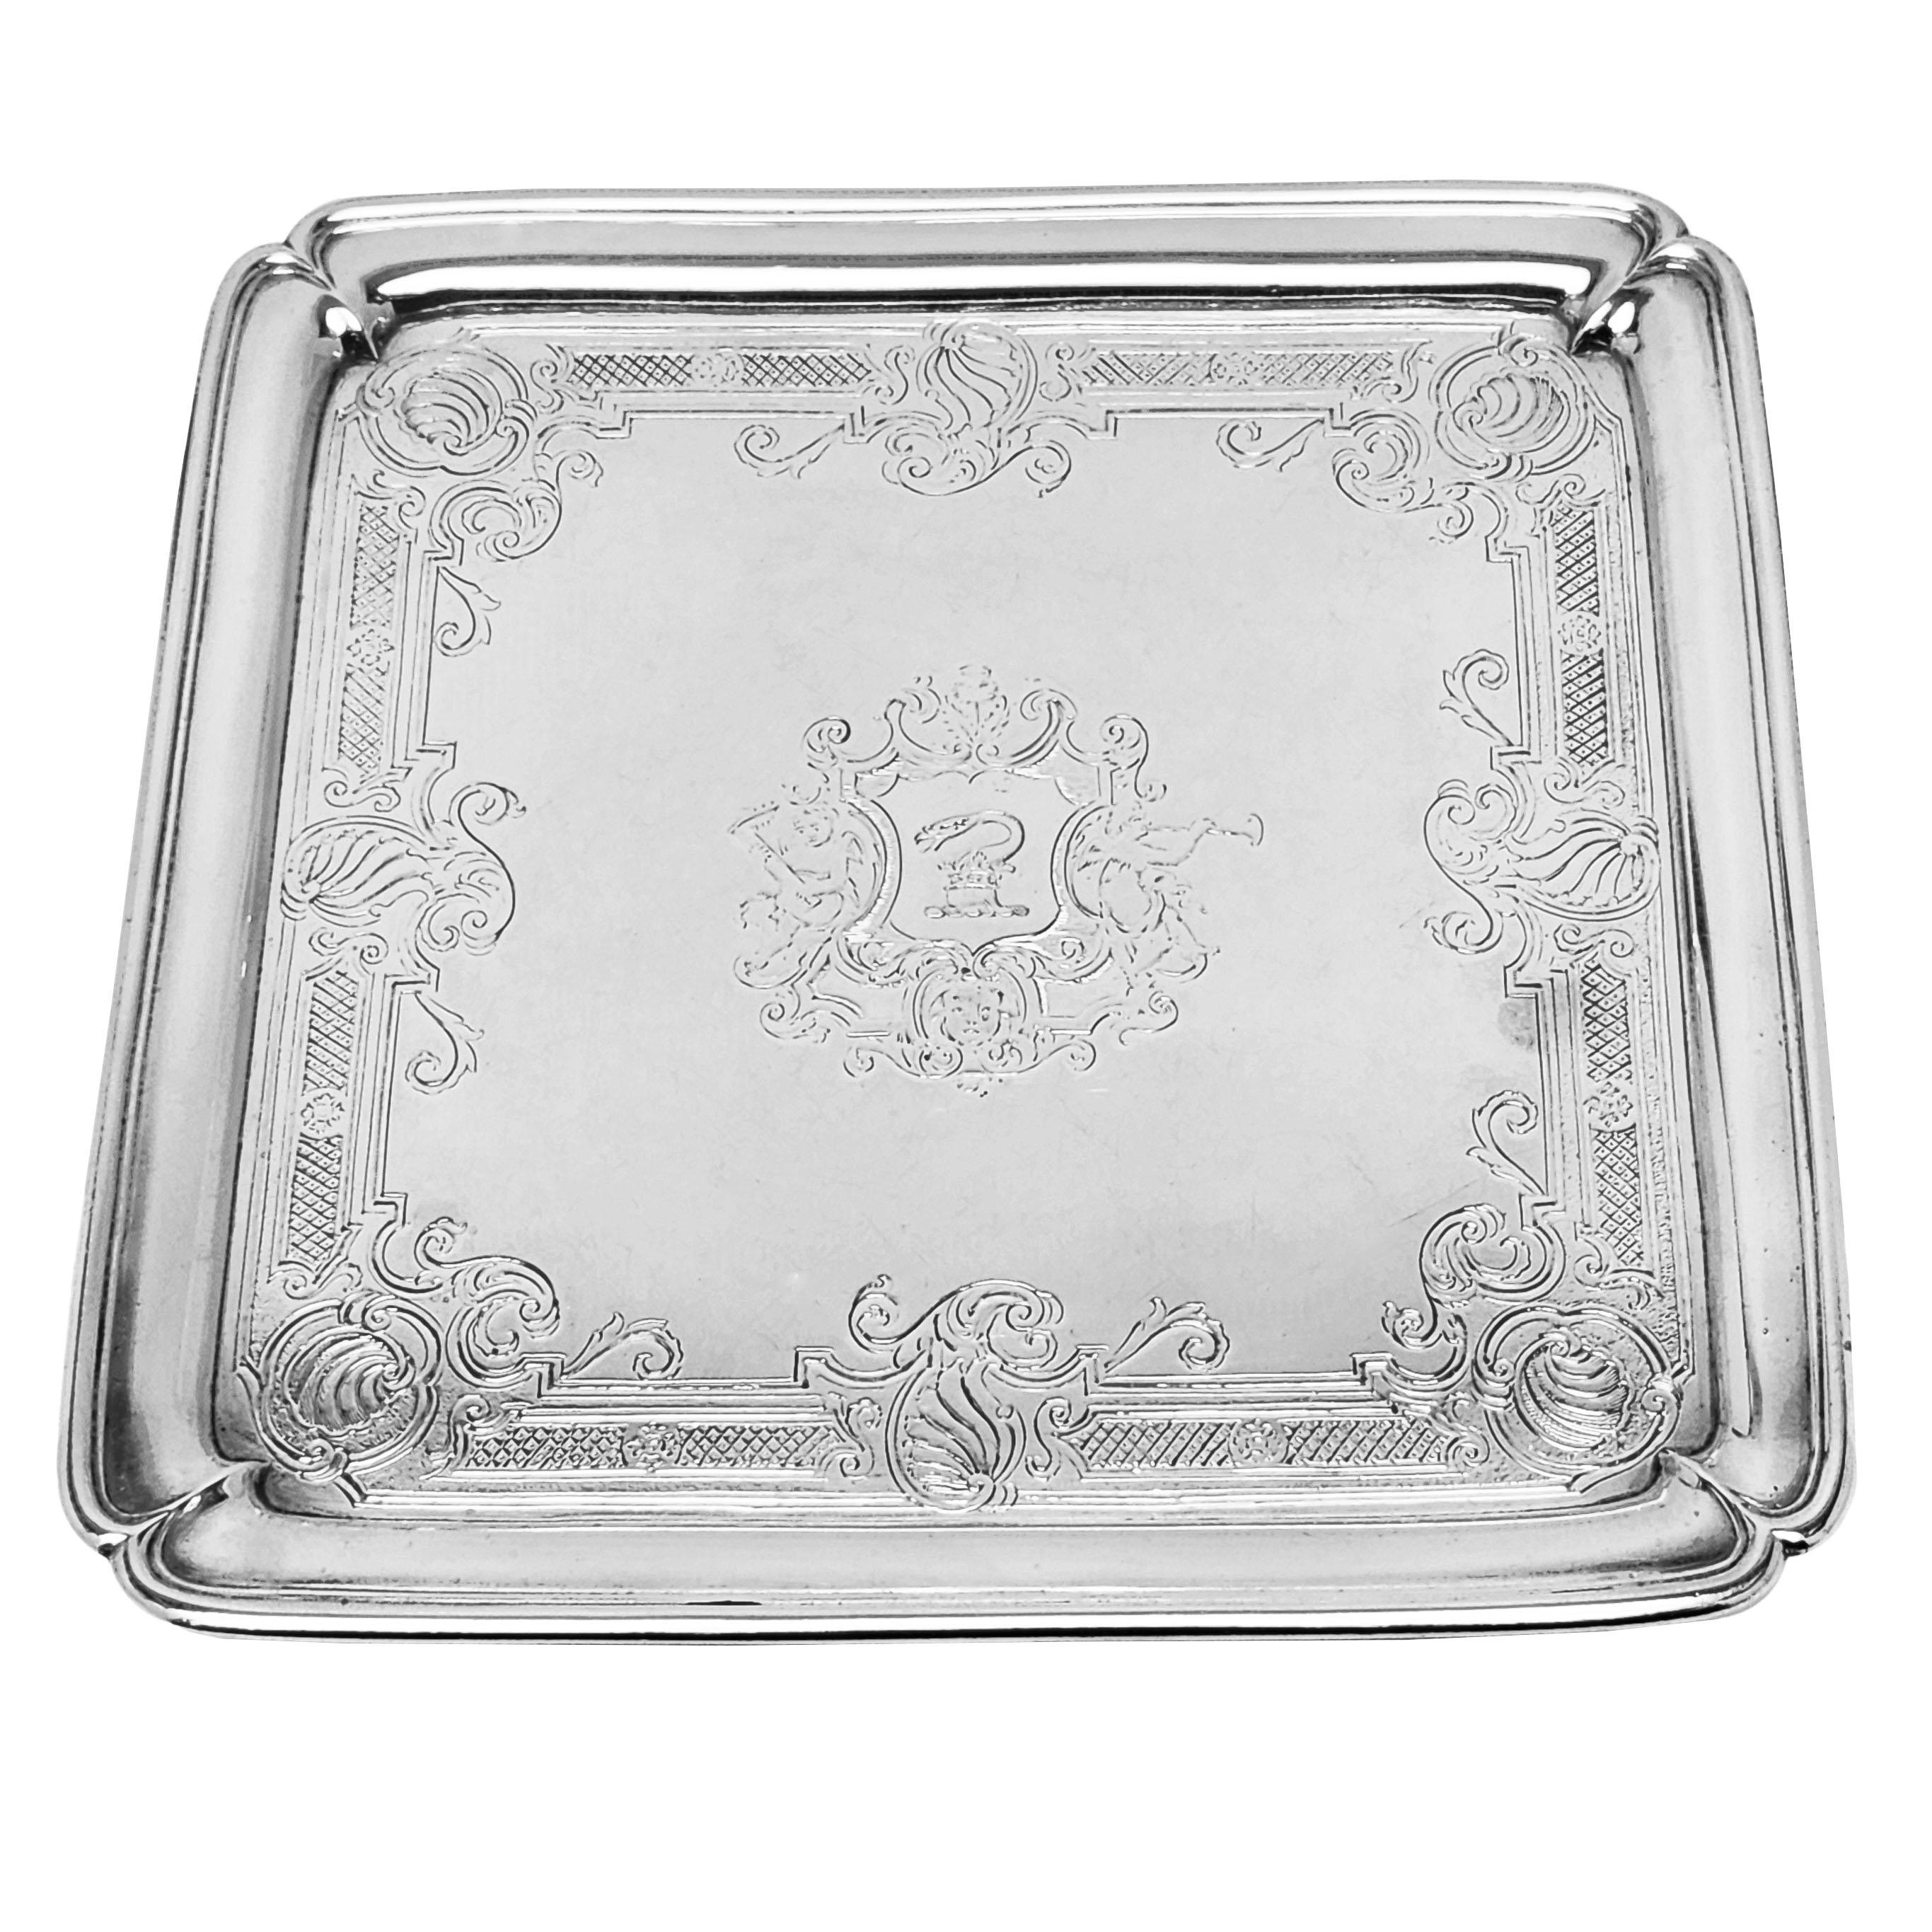 English Antique George II Sterling Silver Salver Square Tray 1733 London, England 18th C For Sale